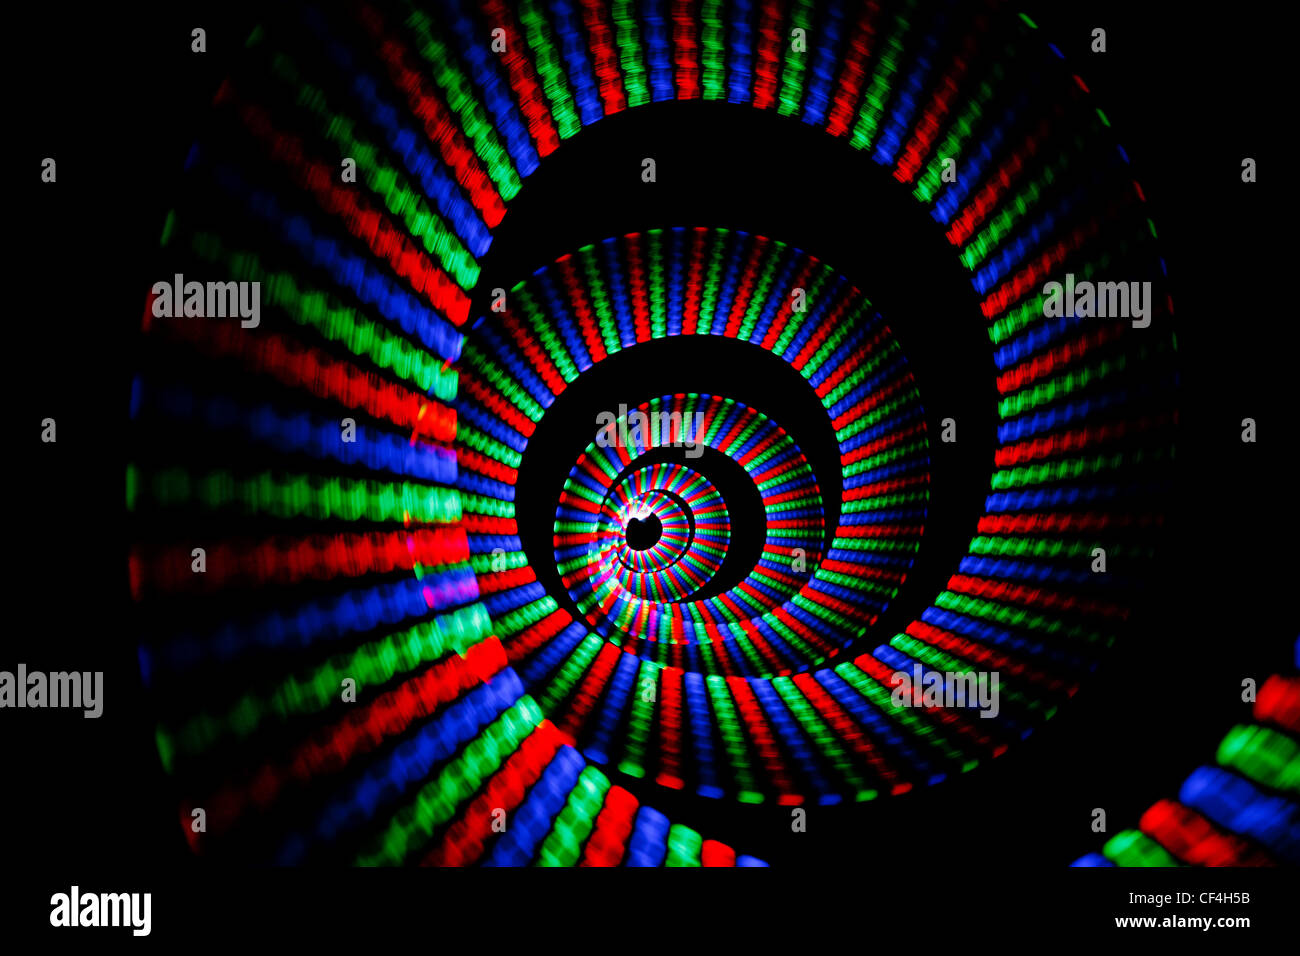 Luminous colors of rainbow trail in form of spiral on black background. Isolated. Stock Photo